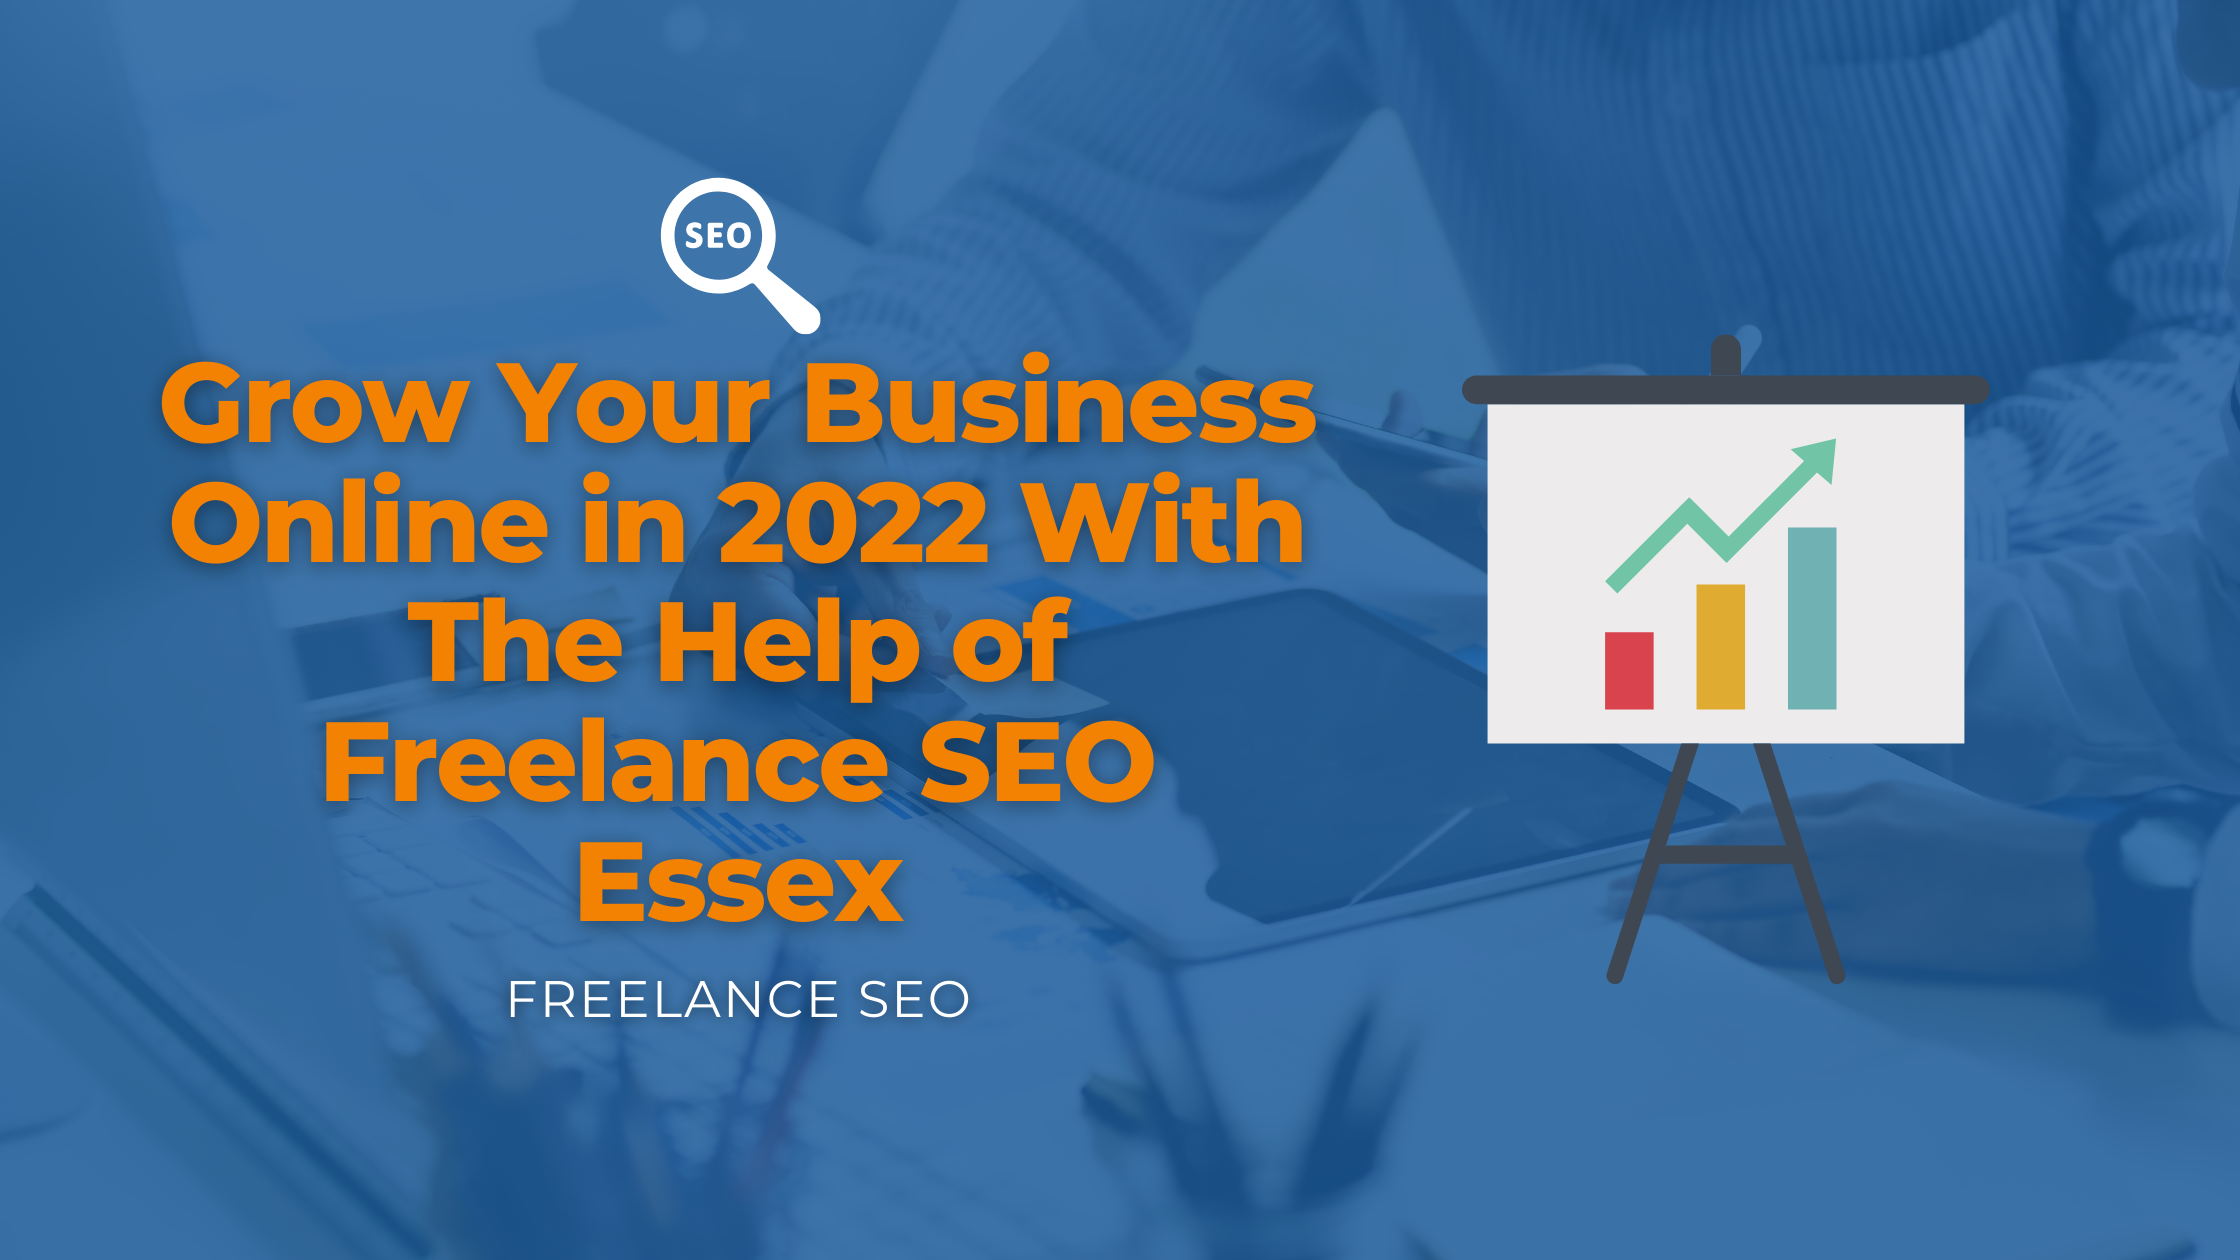 Grow Your Business Online in 2022 With the Help of Freelance SEO Essex